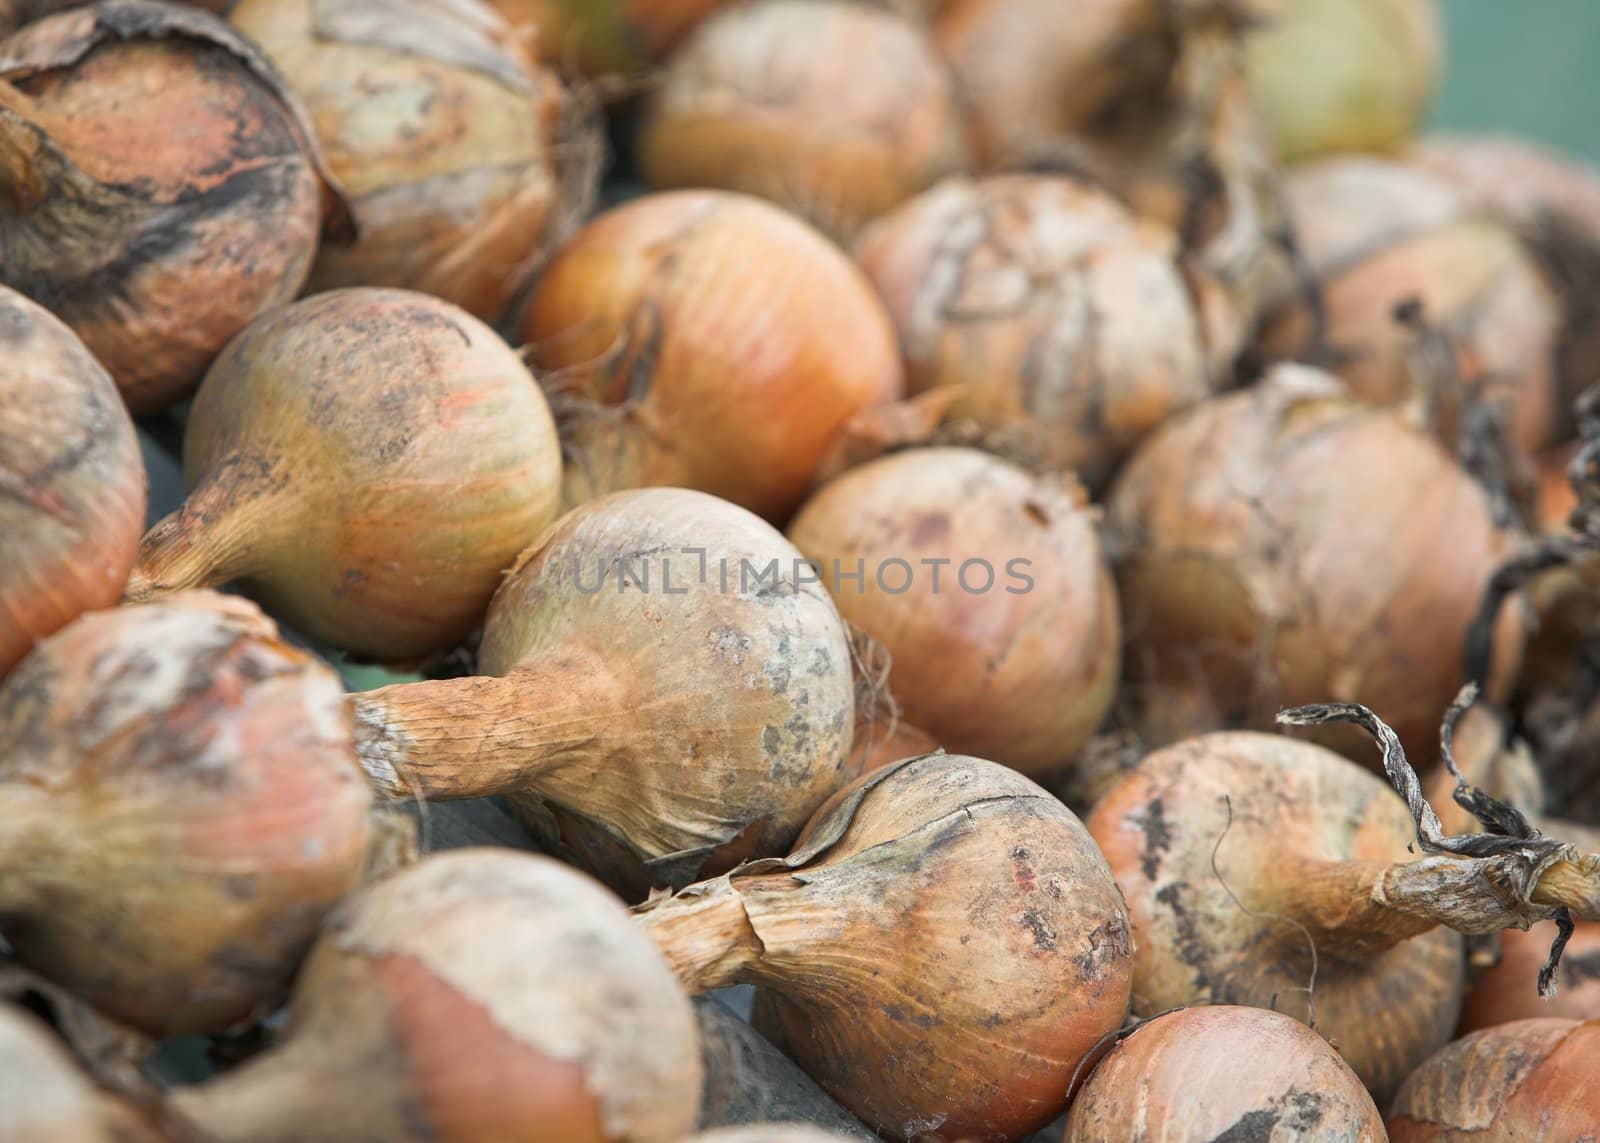 A crop on onions drying in a greenhouse.